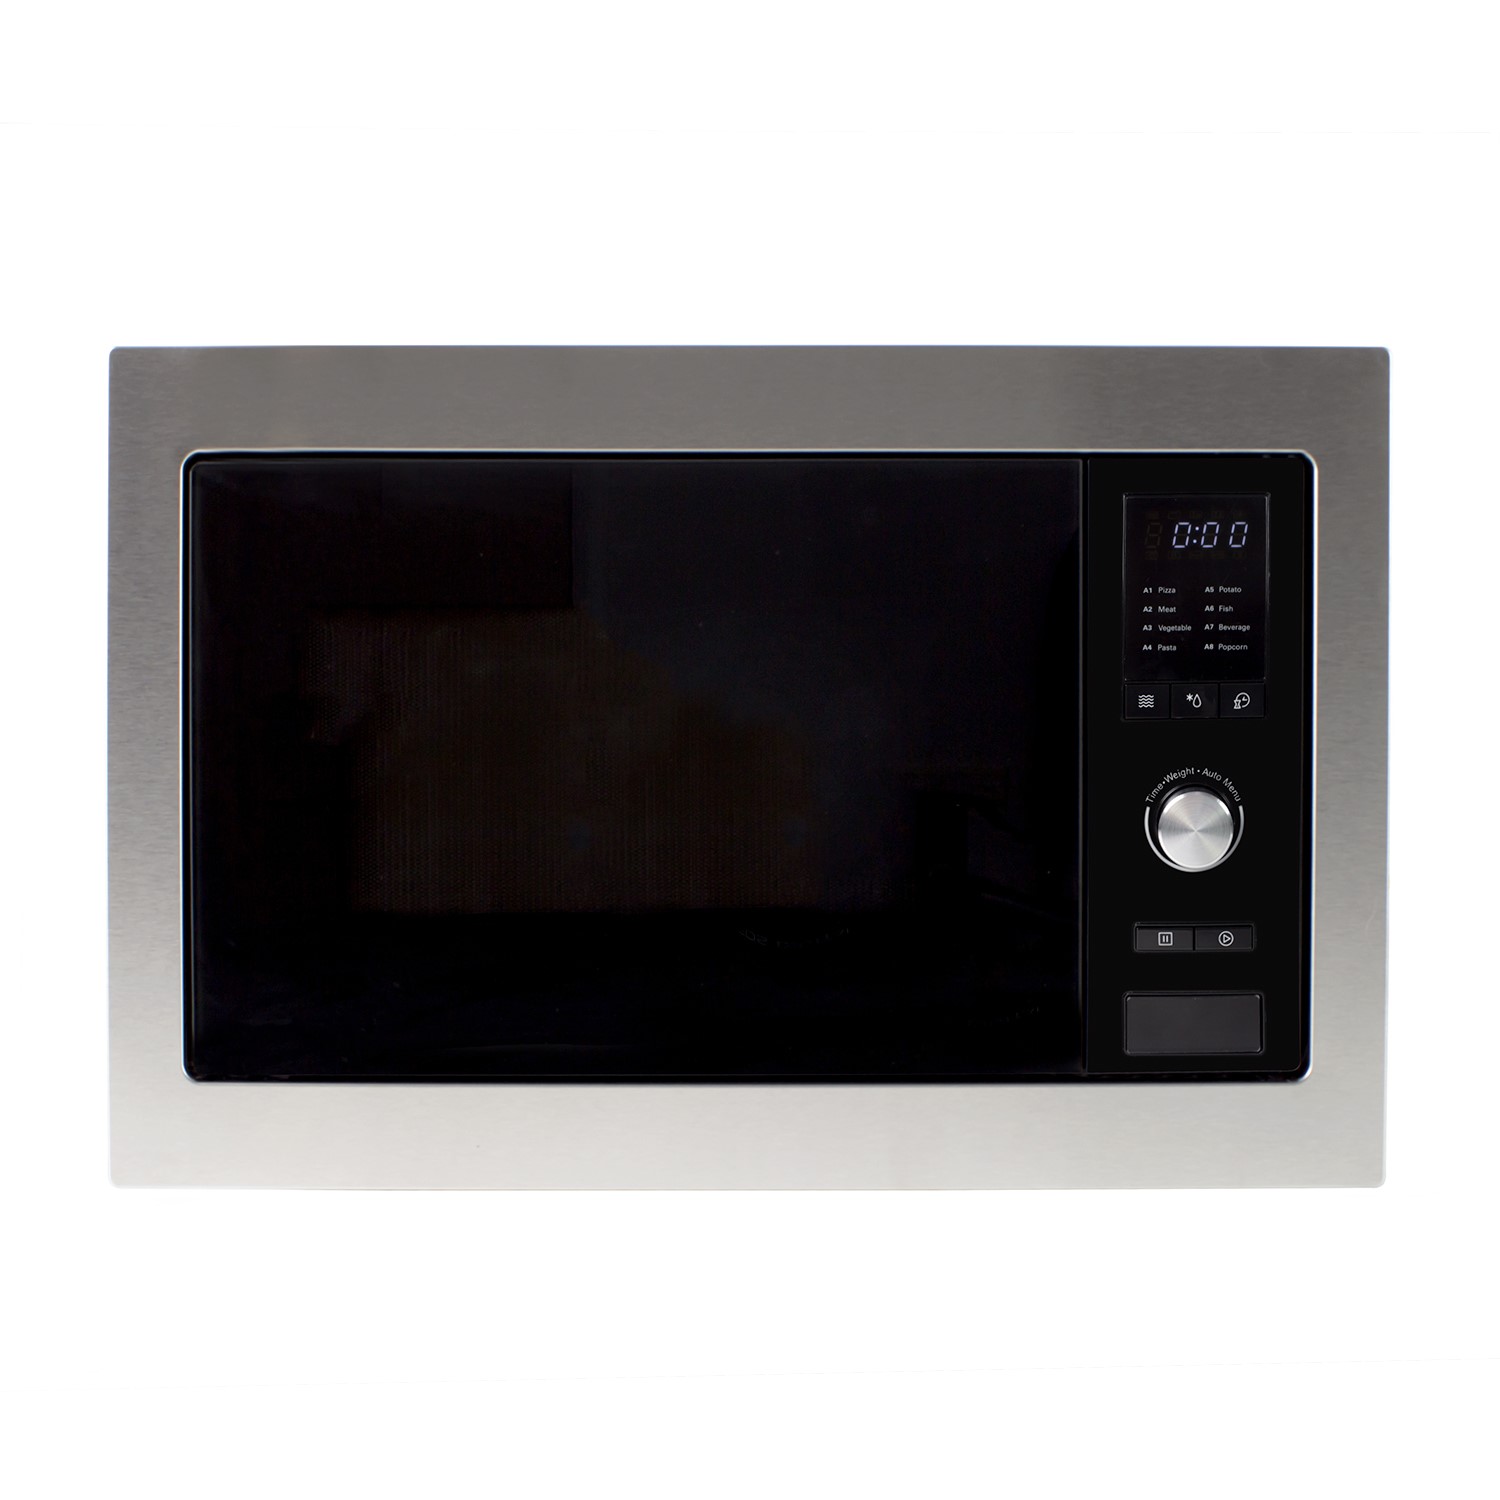 25L Built-in Microwave Oven Stainless Steel